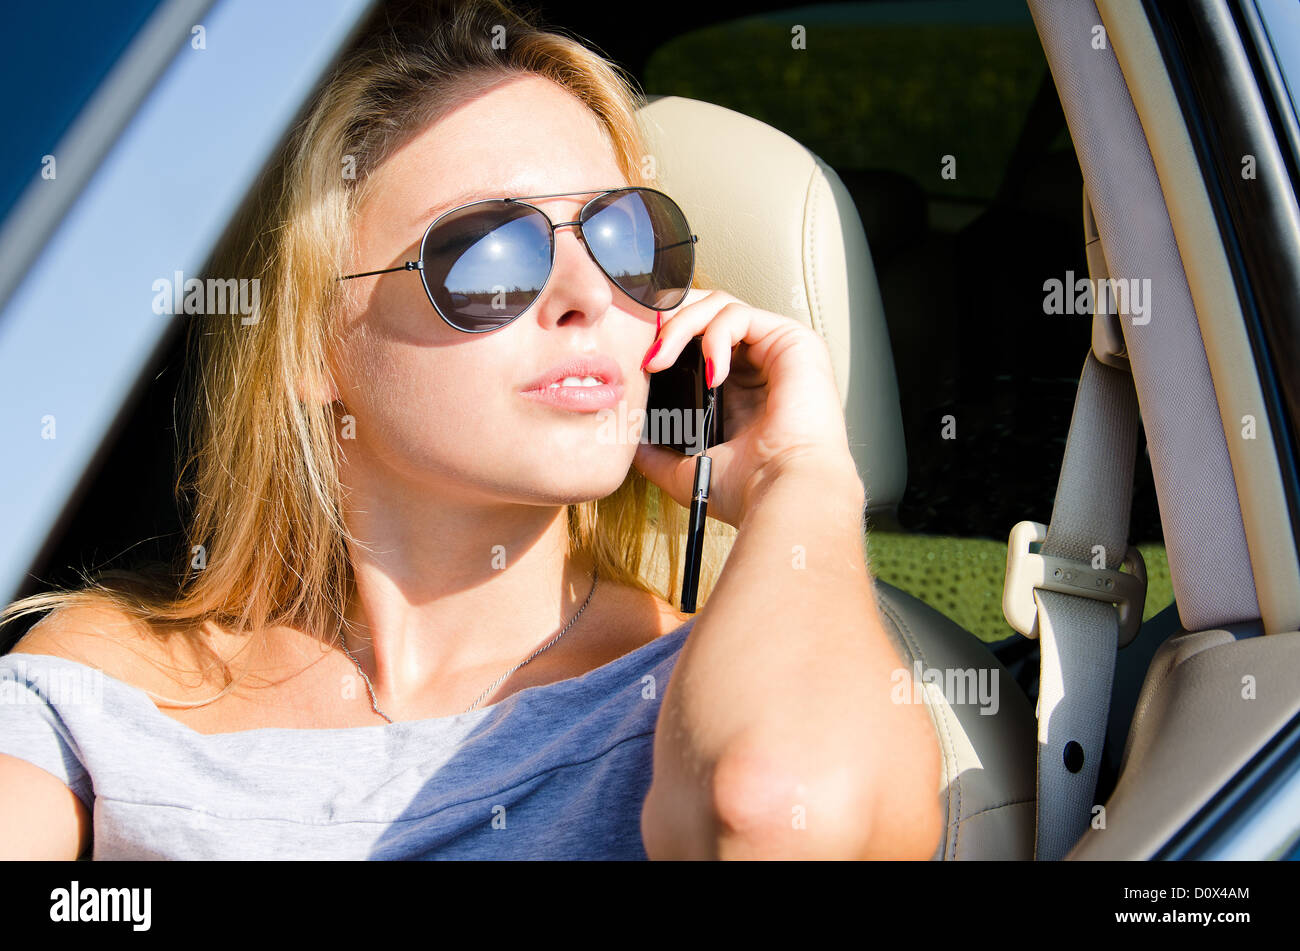 View through the open side window of a beautiful woman in sunglasses using a mobile in her car Stock Photo